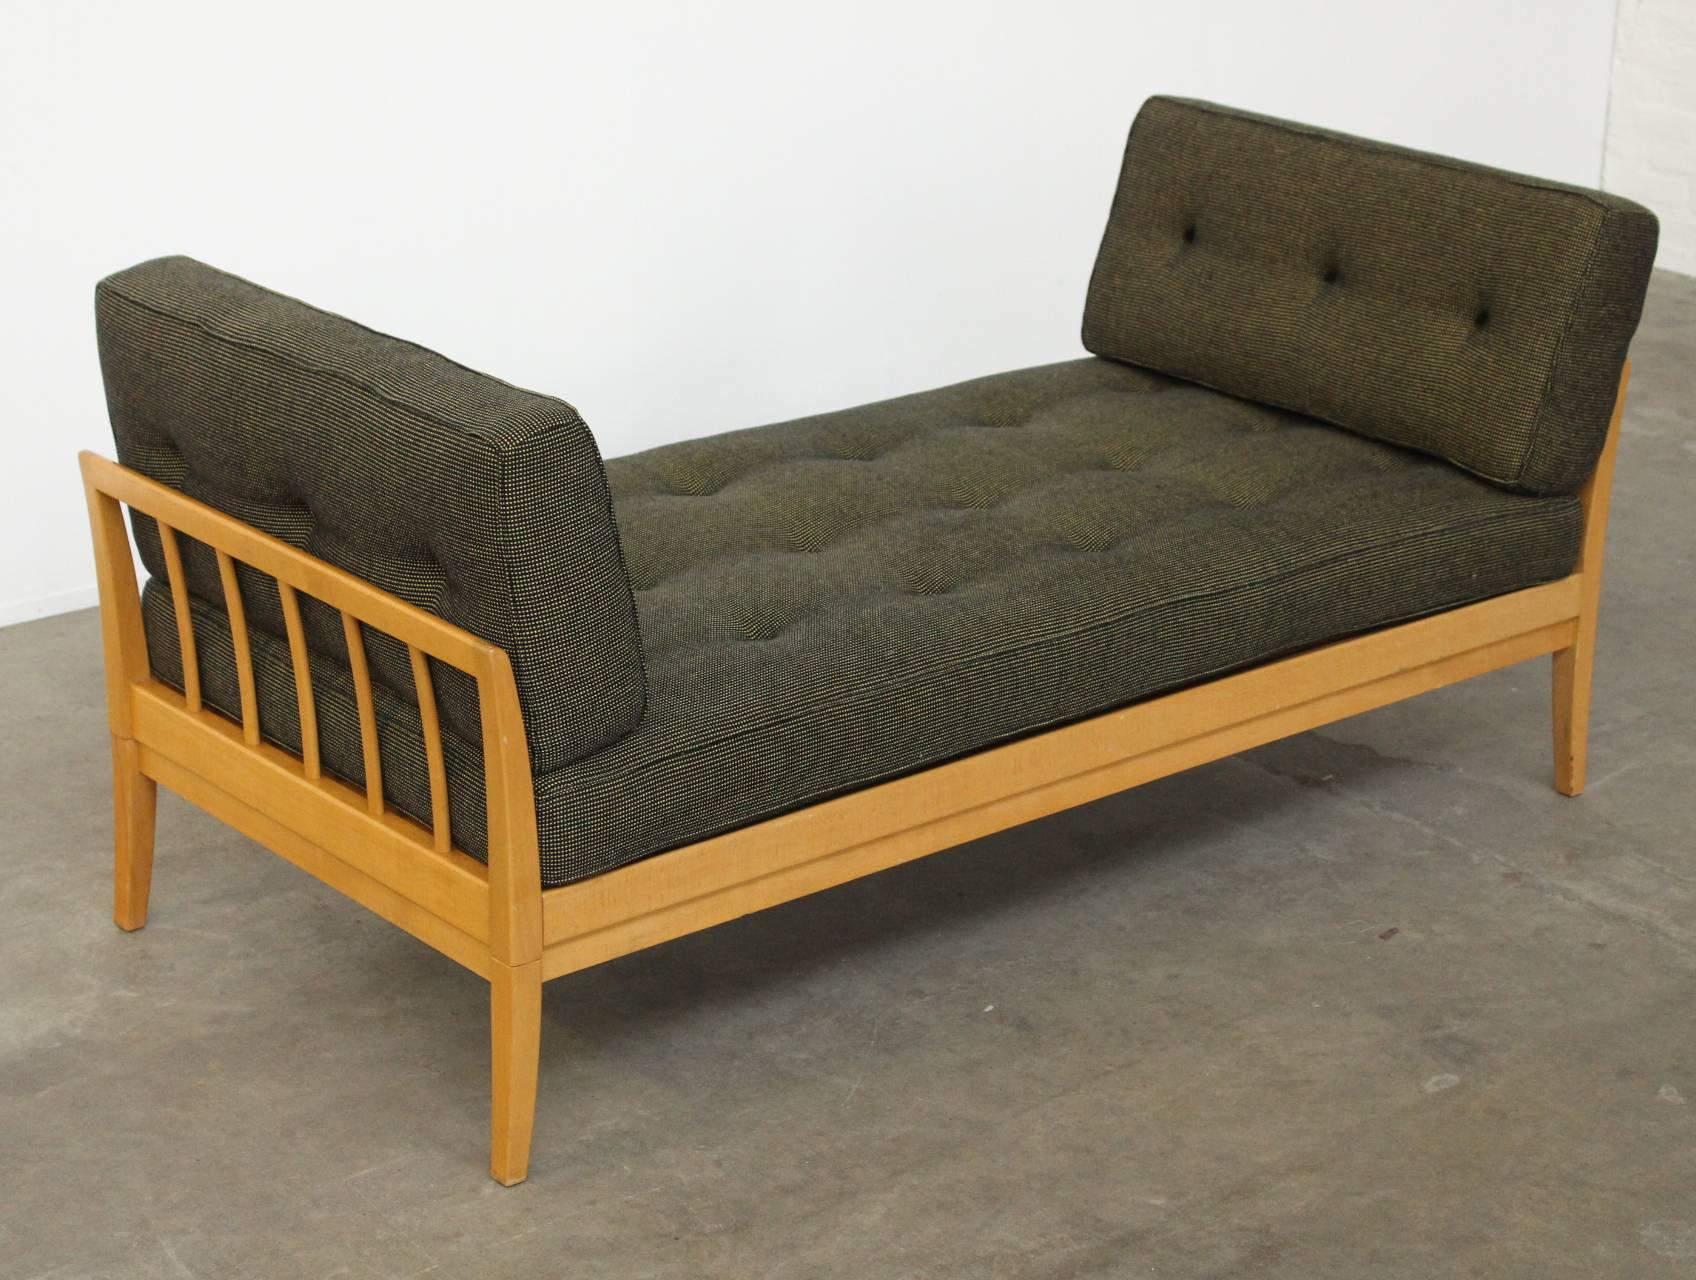 Very rare wonderful birch wood daybed by Knoll, part of the Antimott range of furniture. The right armrest has a sliding mechanism and extends to 210cm (83 inches). The original tufted fabric cushions are in perfect condition and the wood is